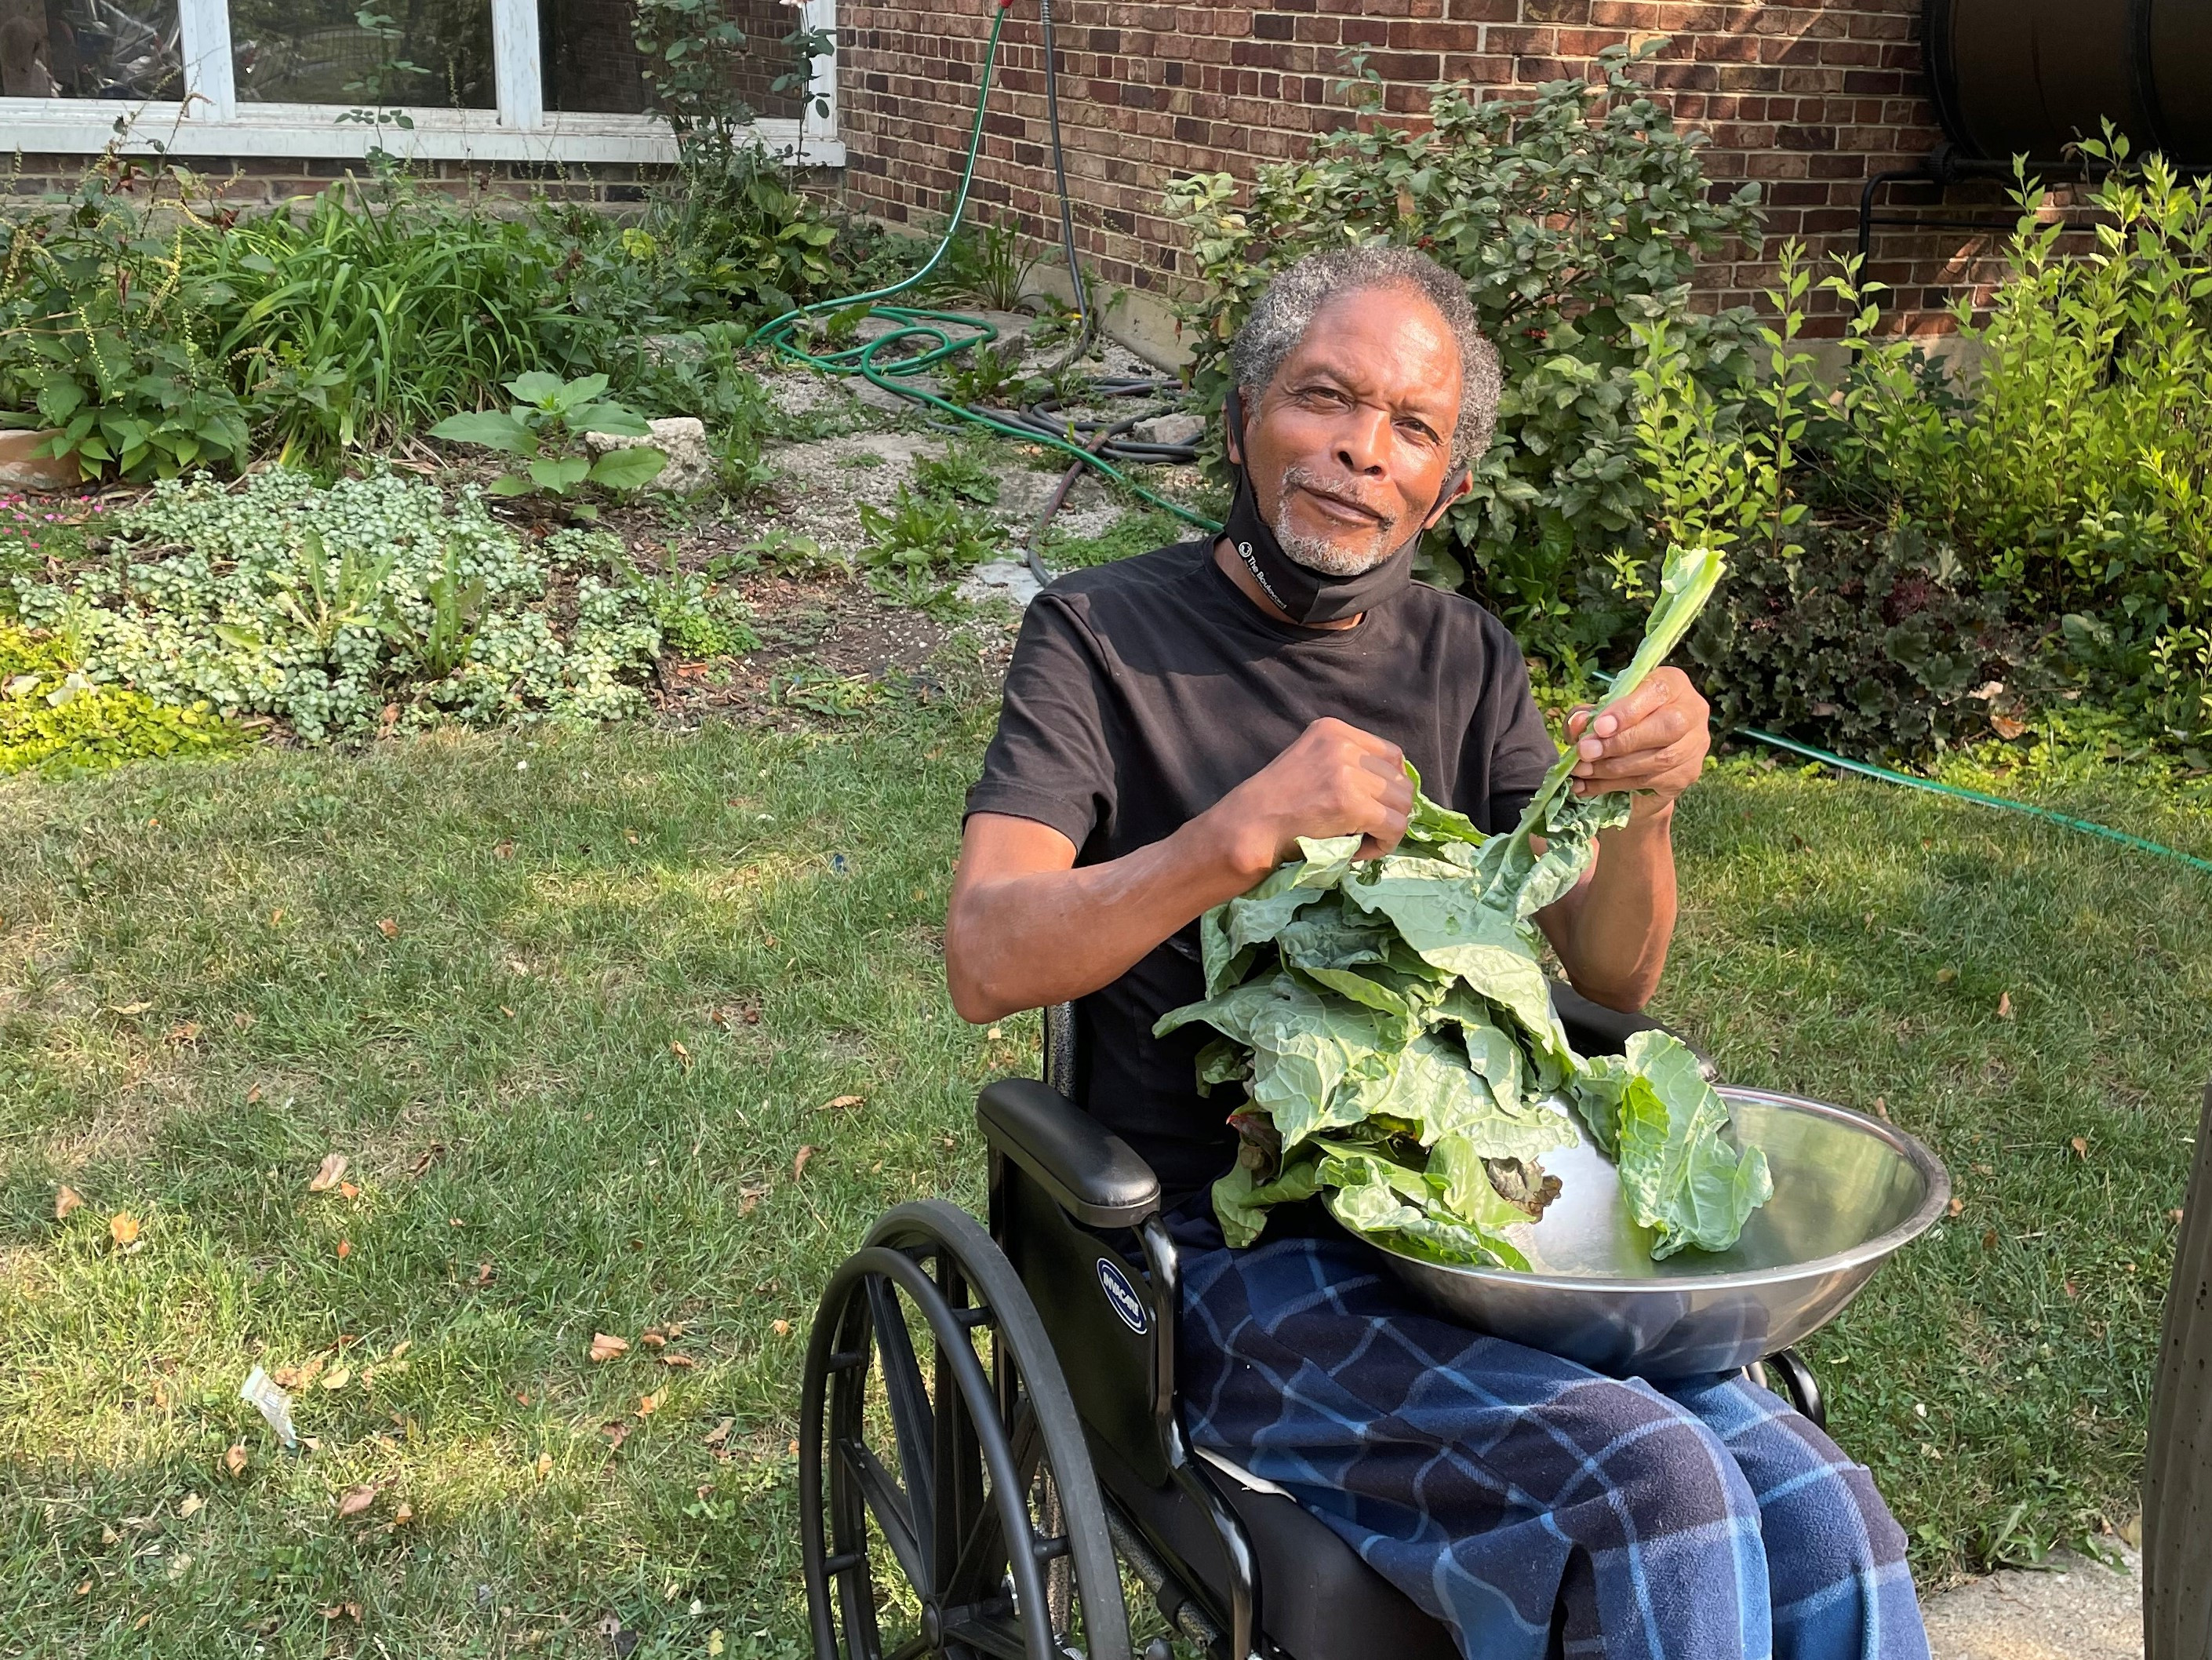 Our residents need access to good nutritious food in order to restore their health and regain stability in their lives. You can help!